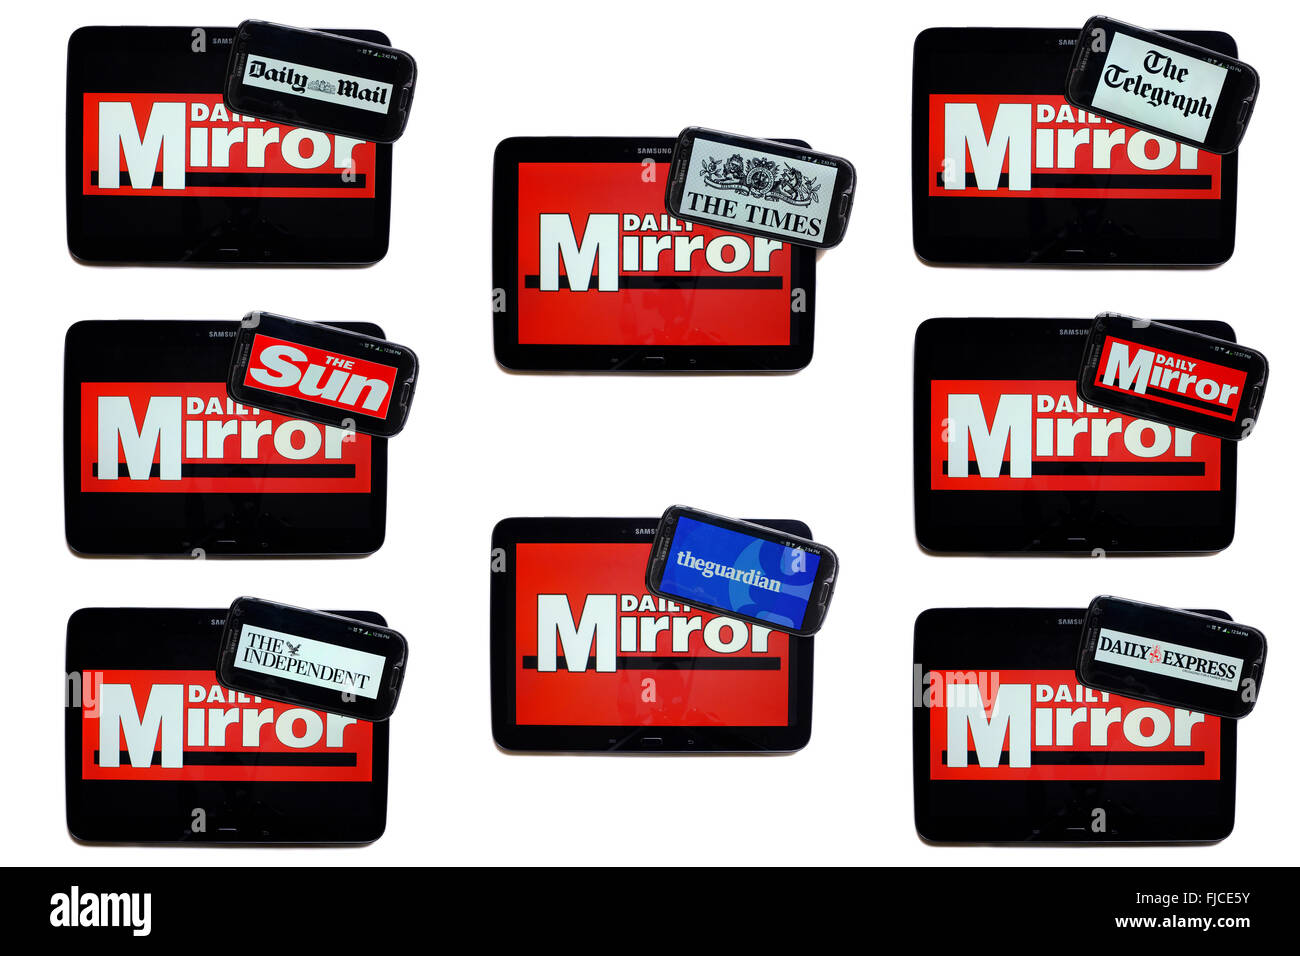 The Daily Mirror newspaper logo on tablet screens surrounded by smartphones displaying the logos of rival newspapers. Stock Photo